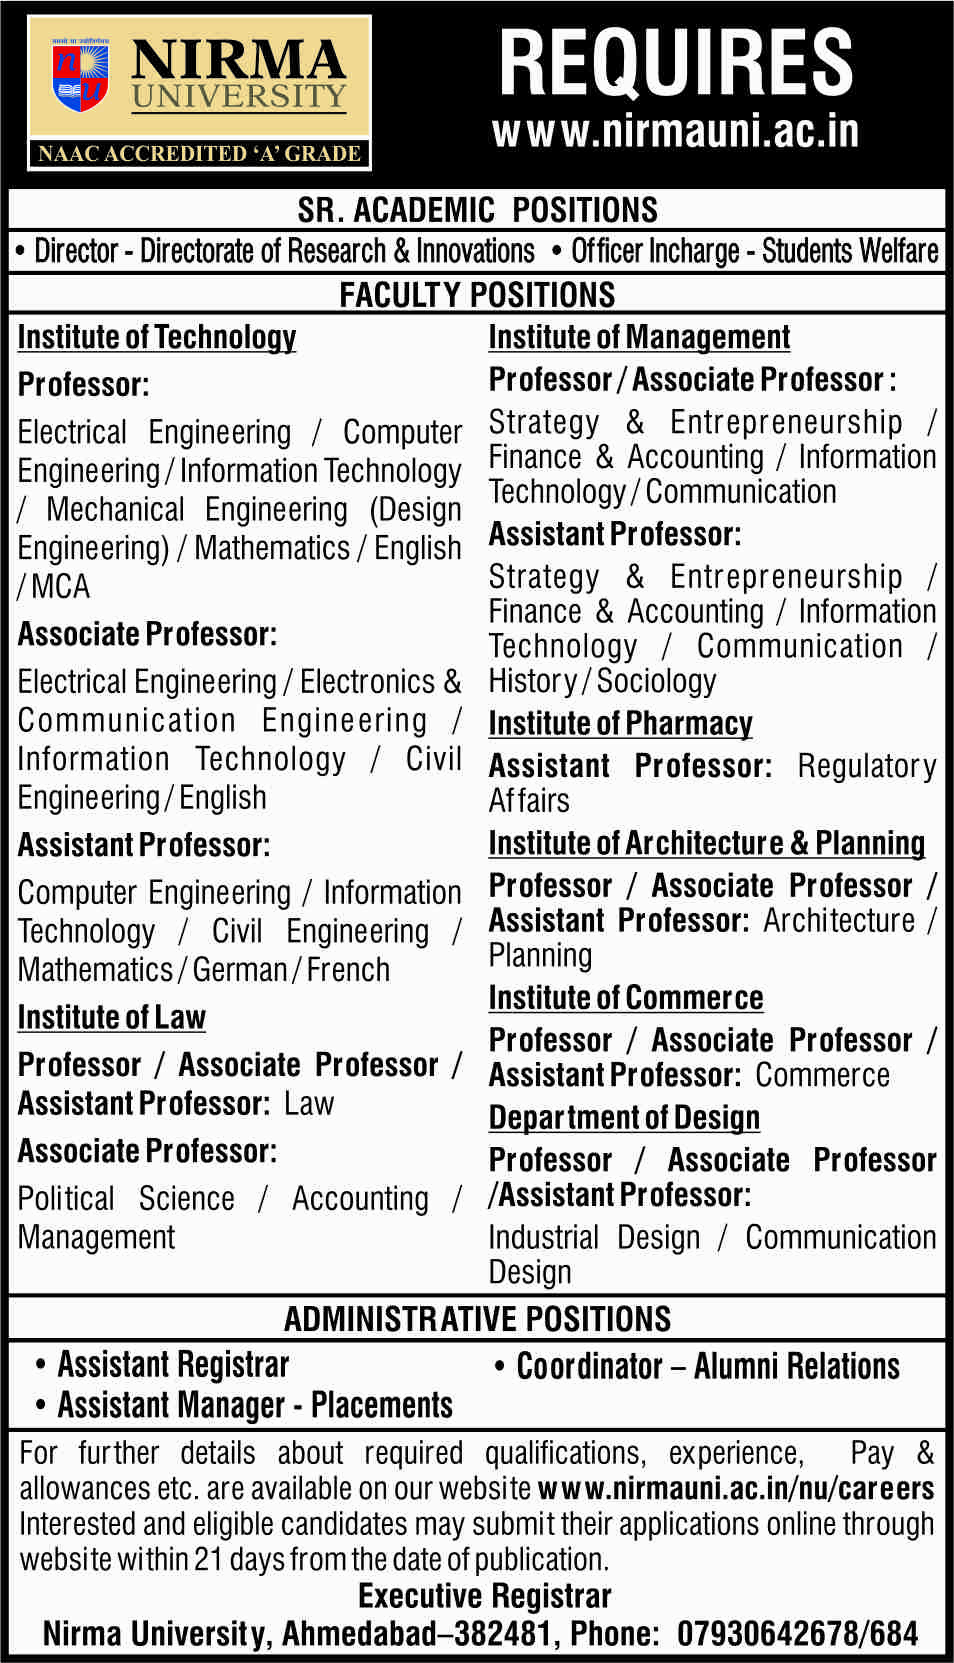 Nirma University hiring faculty posts for its various departments